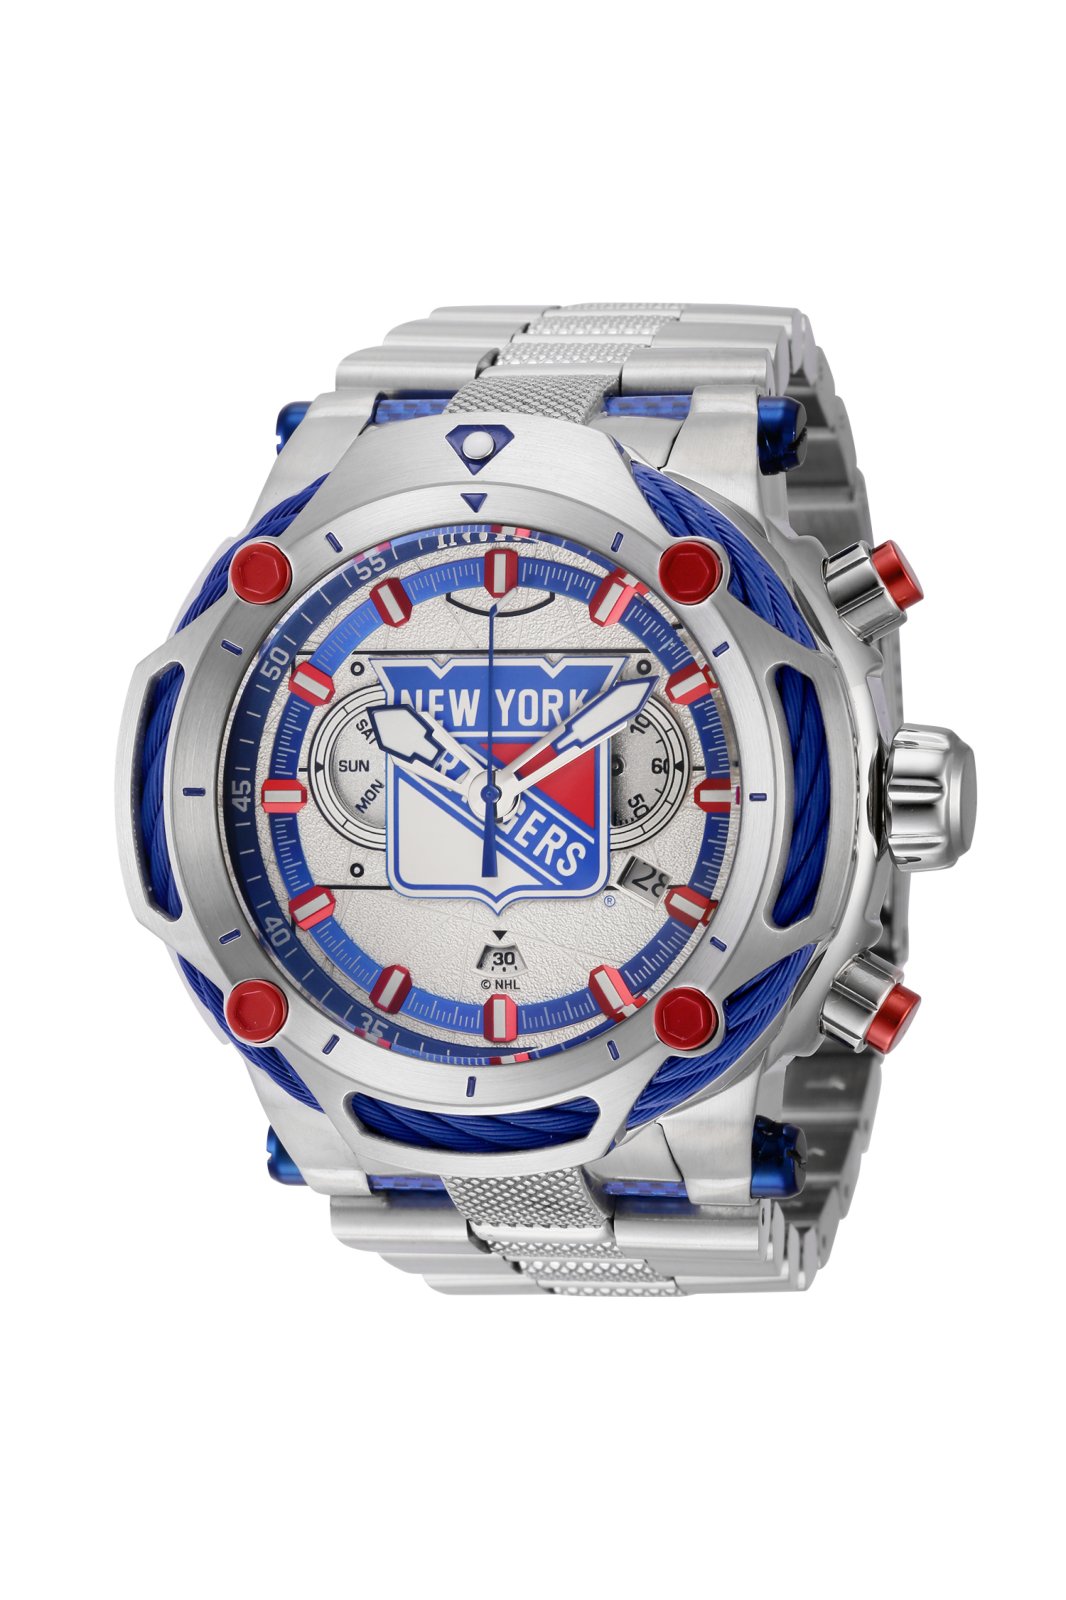 Invicta Watch NHL - New York Rangers 42202 - Official Invicta Store